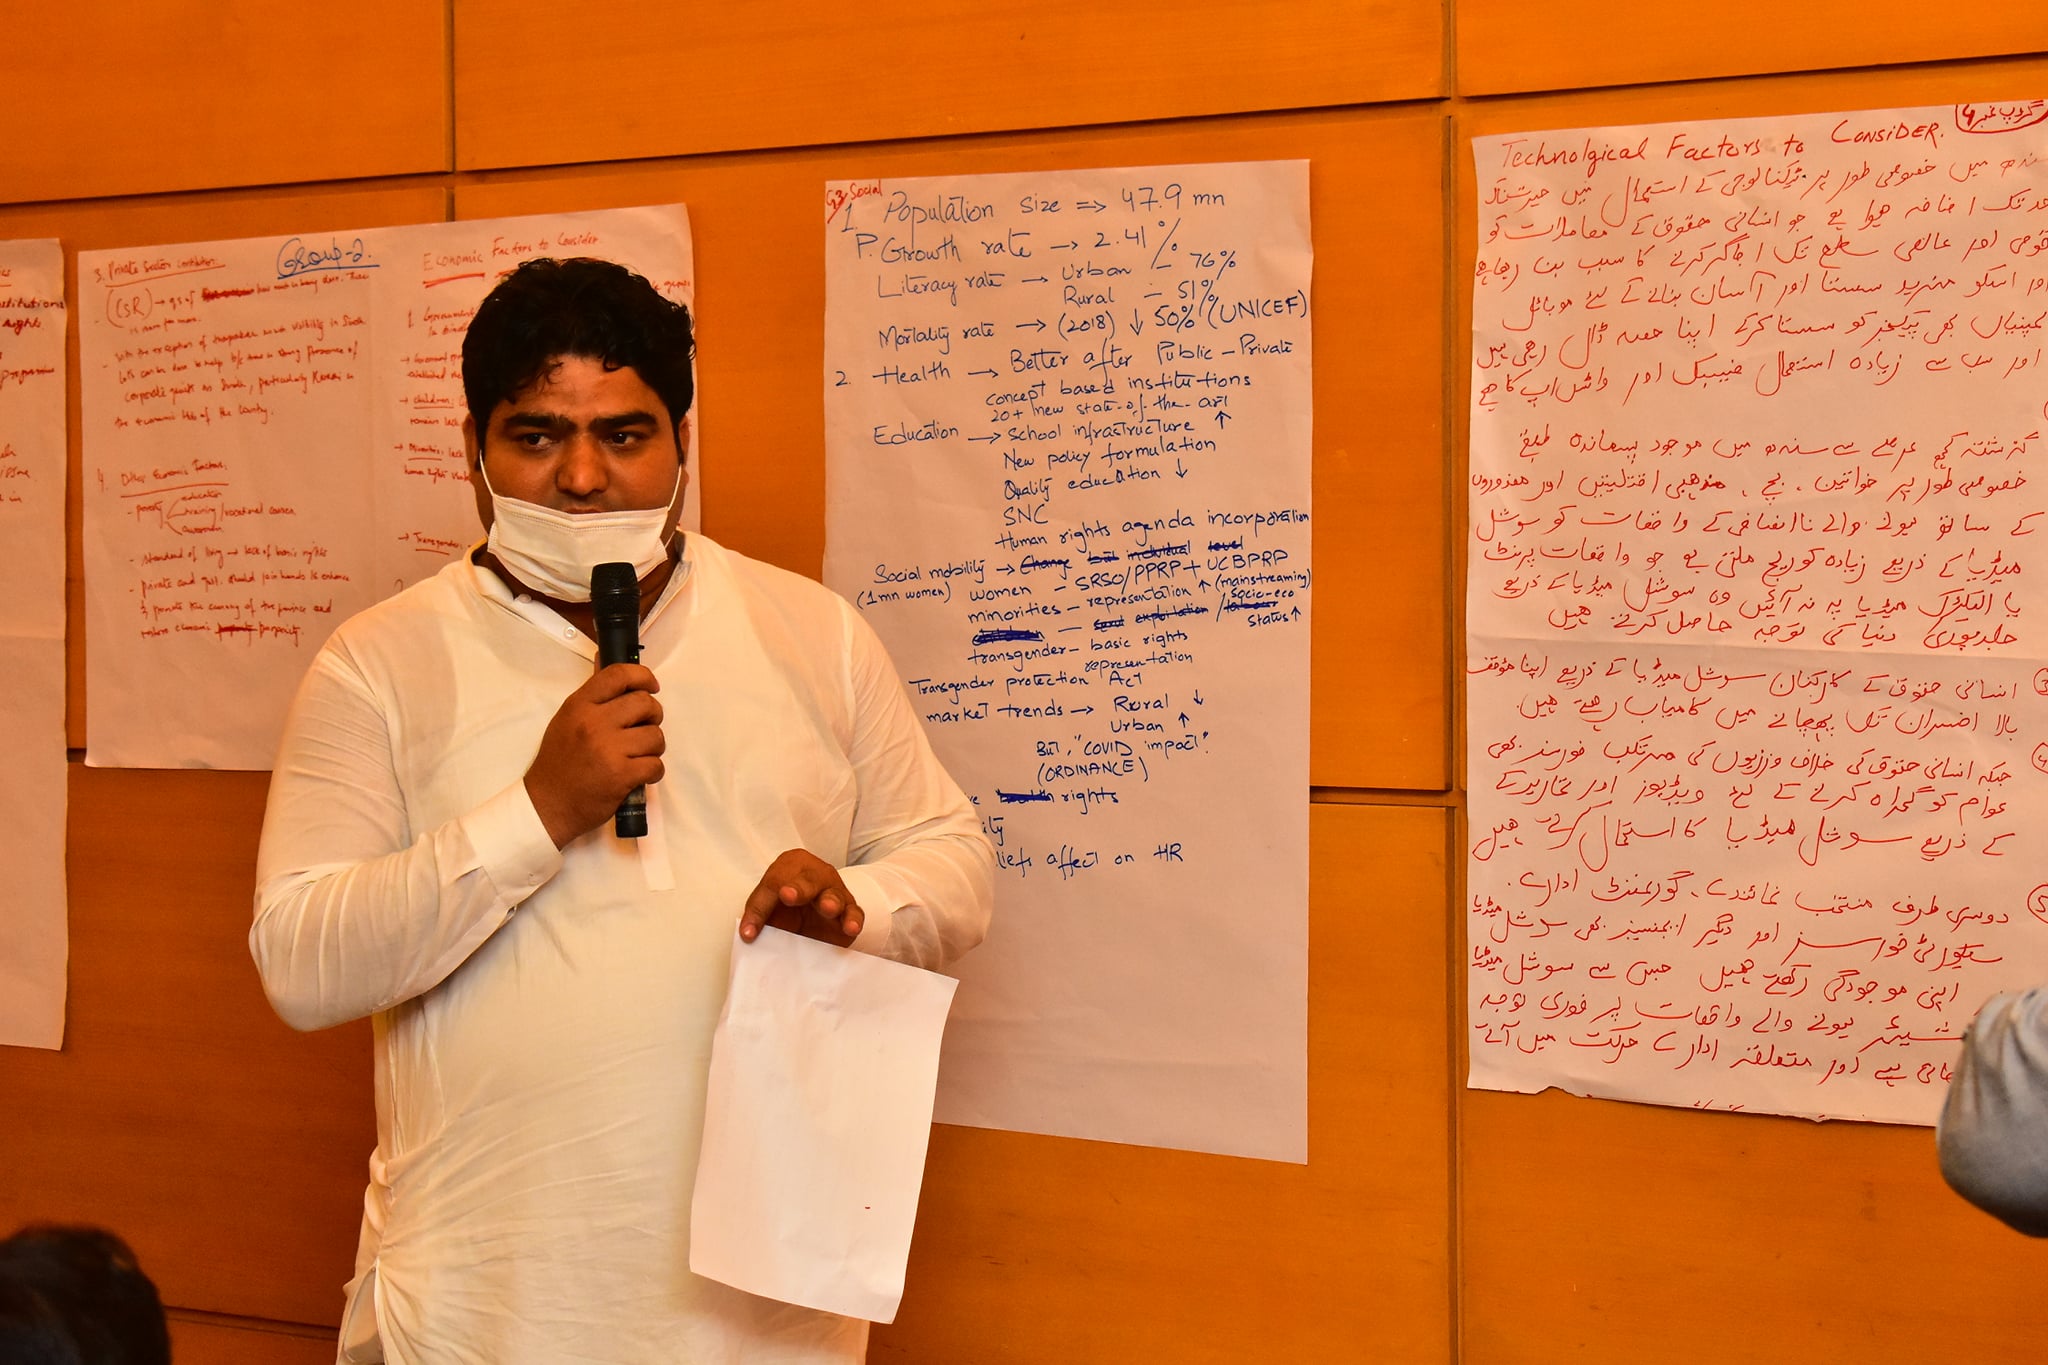 The Sindh Human Rights Commission organized the Strategic Planning workshop